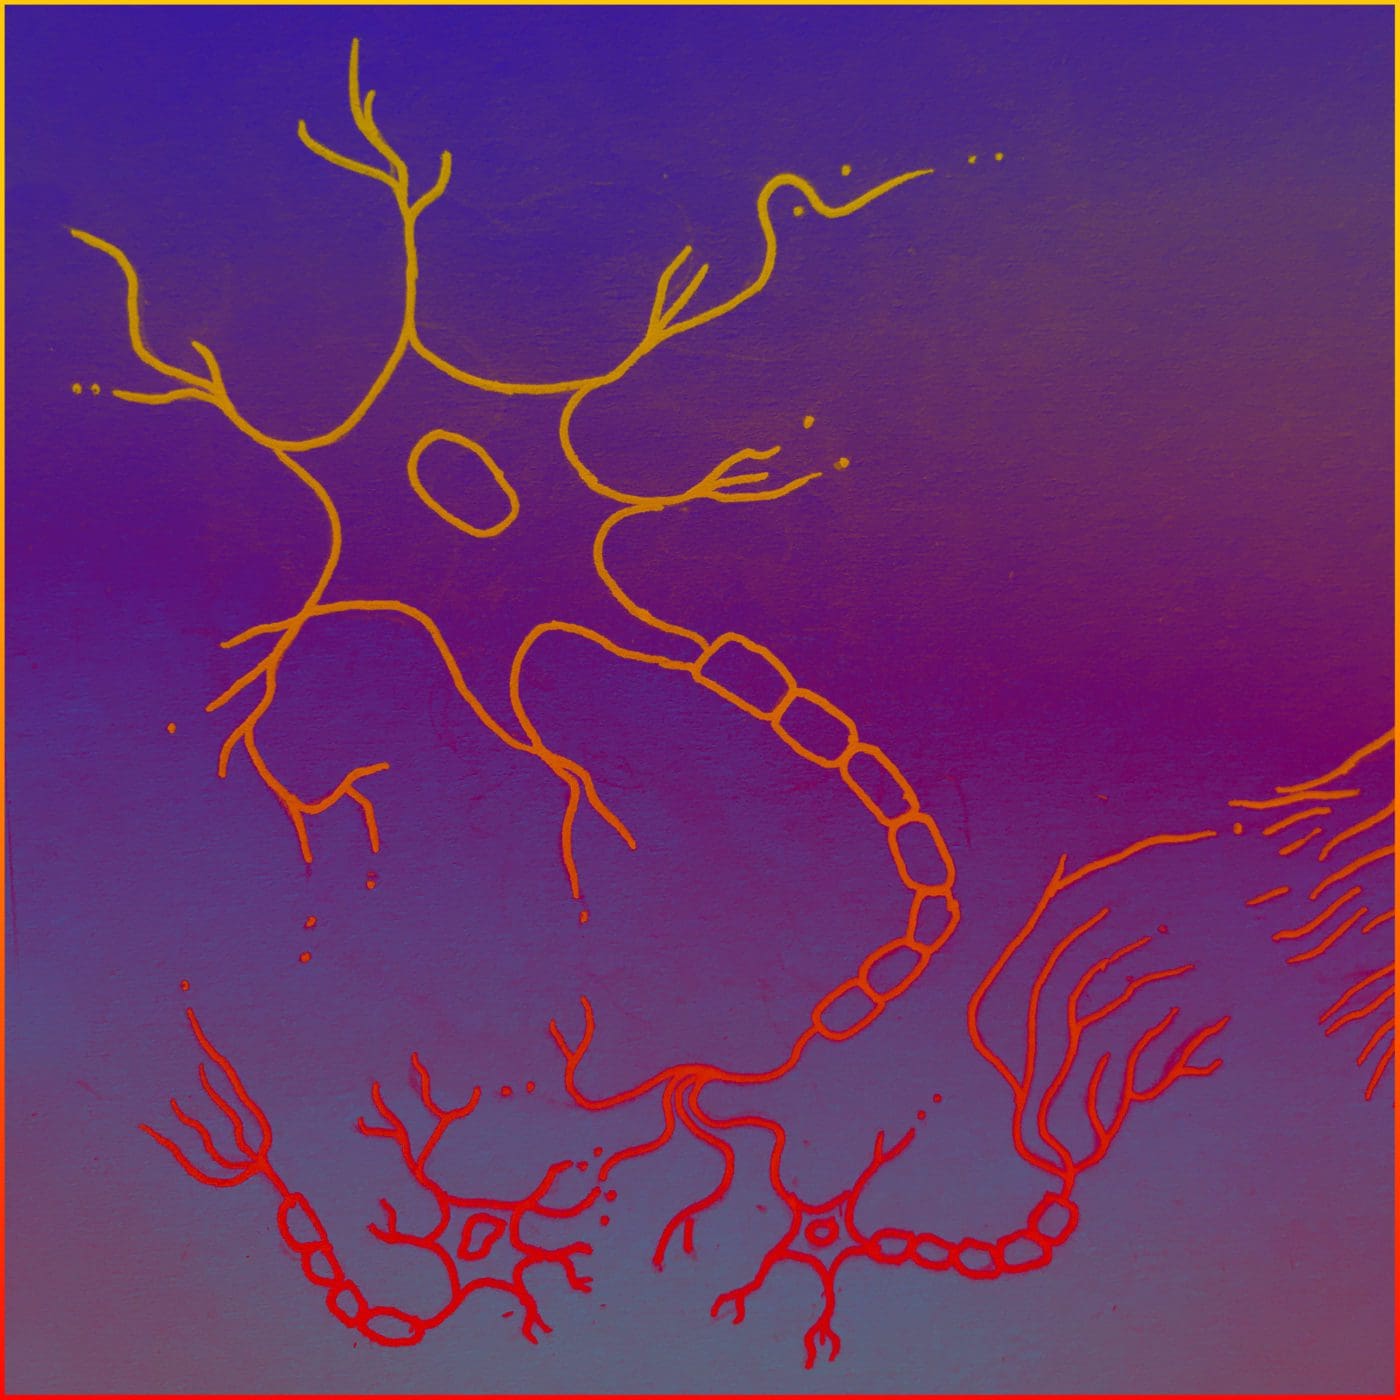 A line drawing of orange on vivid purple depicts three neurons. These organic shapes have three main parts akin to a tree: dendrites resembling branches, the soma resembling a segmented trunk and the root-like axon.